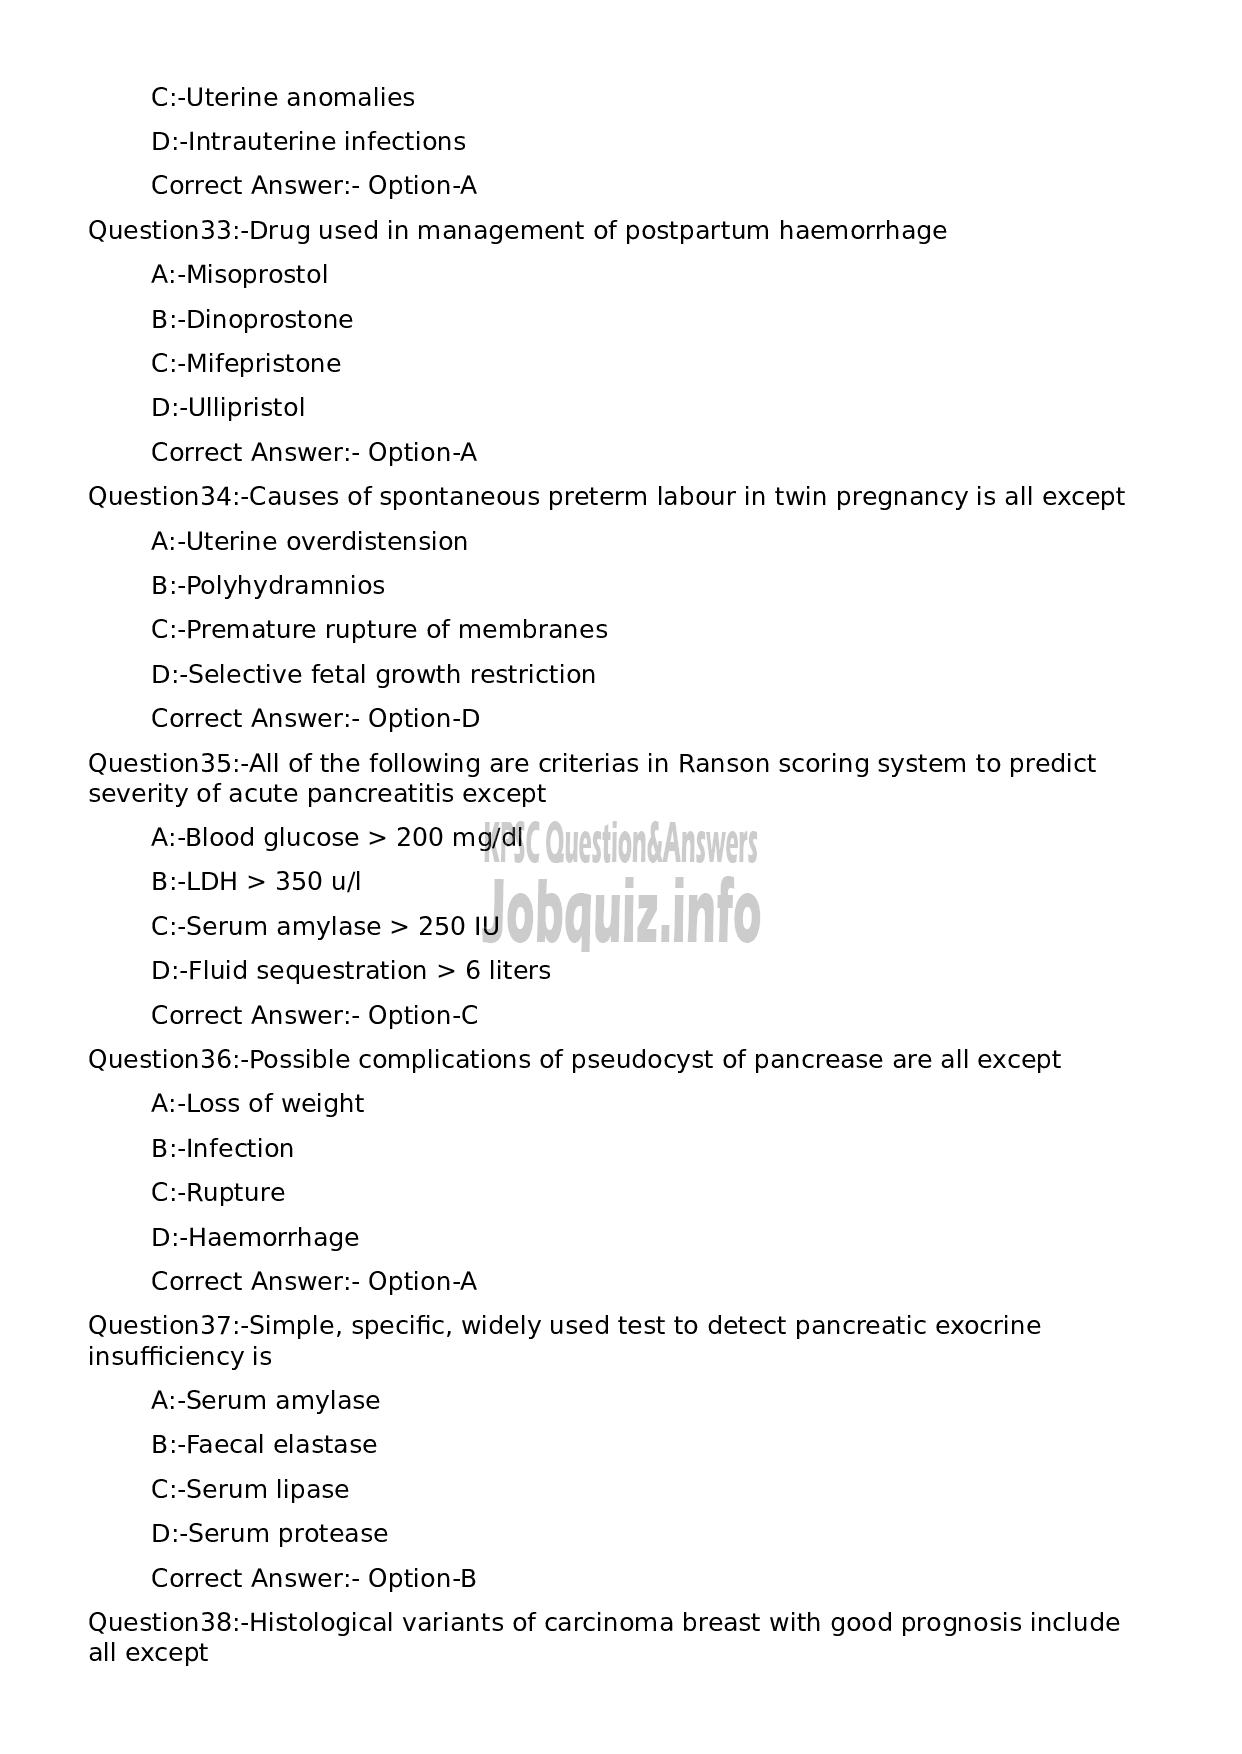 Kerala PSC Question Paper -  Assistant Surgeon/ Casuality Medical Officer-7